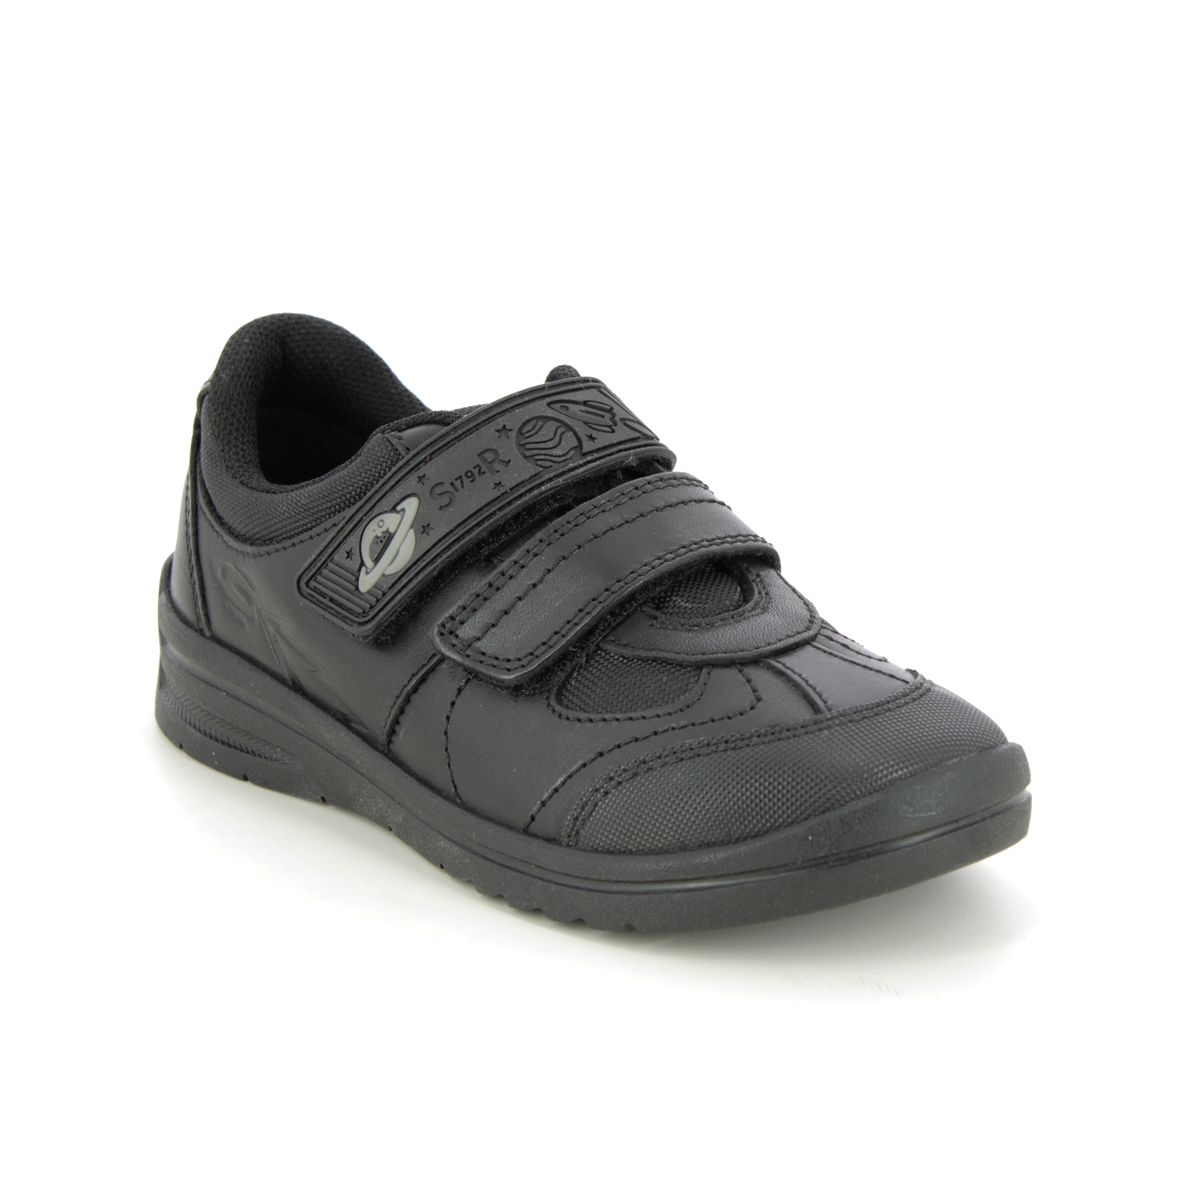 Start Rite - Rocket 2V In Black Leather 2797-75E In Size 11 In Plain Black Leather For School Boys Shoes  In Black Leather For kids